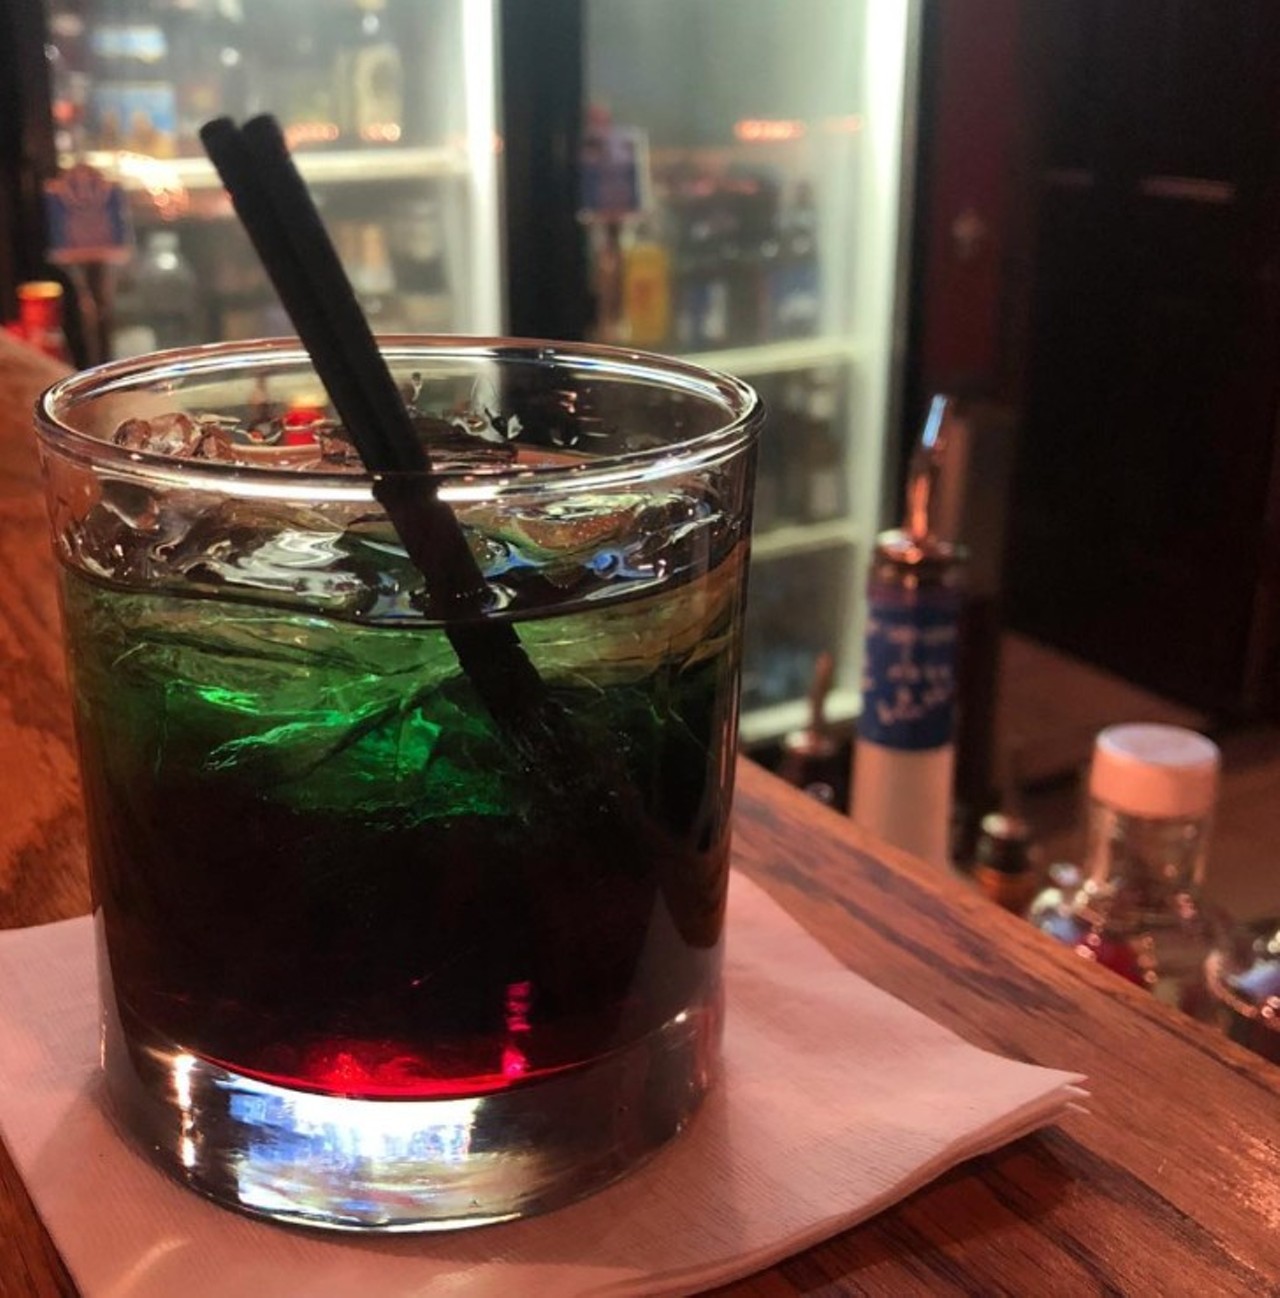 Jacoby&#146;s
624 Brush St., Detroit
Jacoby&#146;s celebrates happy hour every Monday through Friday from 4 p.m. to 7 p.m. offering $1 off domestic and draught beers, and top shelf liquor for just $5.
Photo with permission from @jacobysdetroit